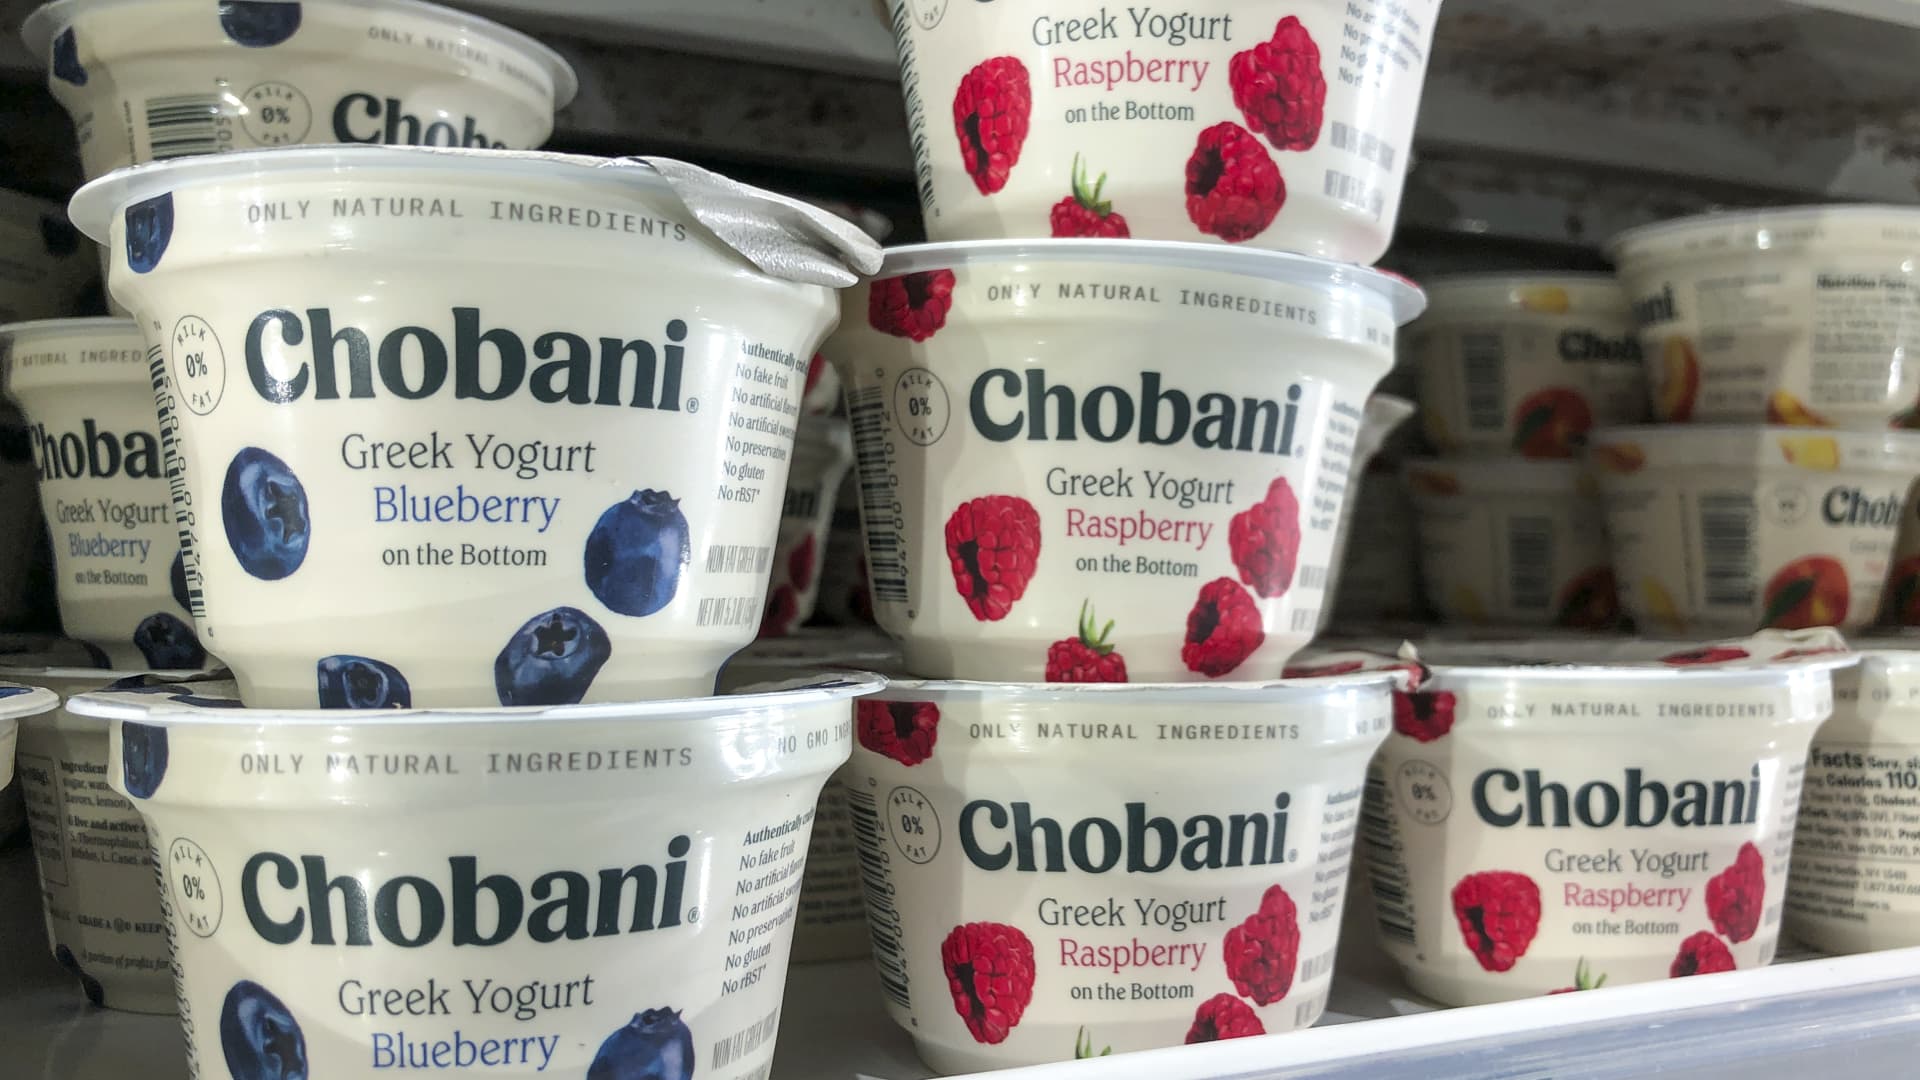 Chobani withdraws IPO plans after yogurt maker filed to go public in November – CNBC